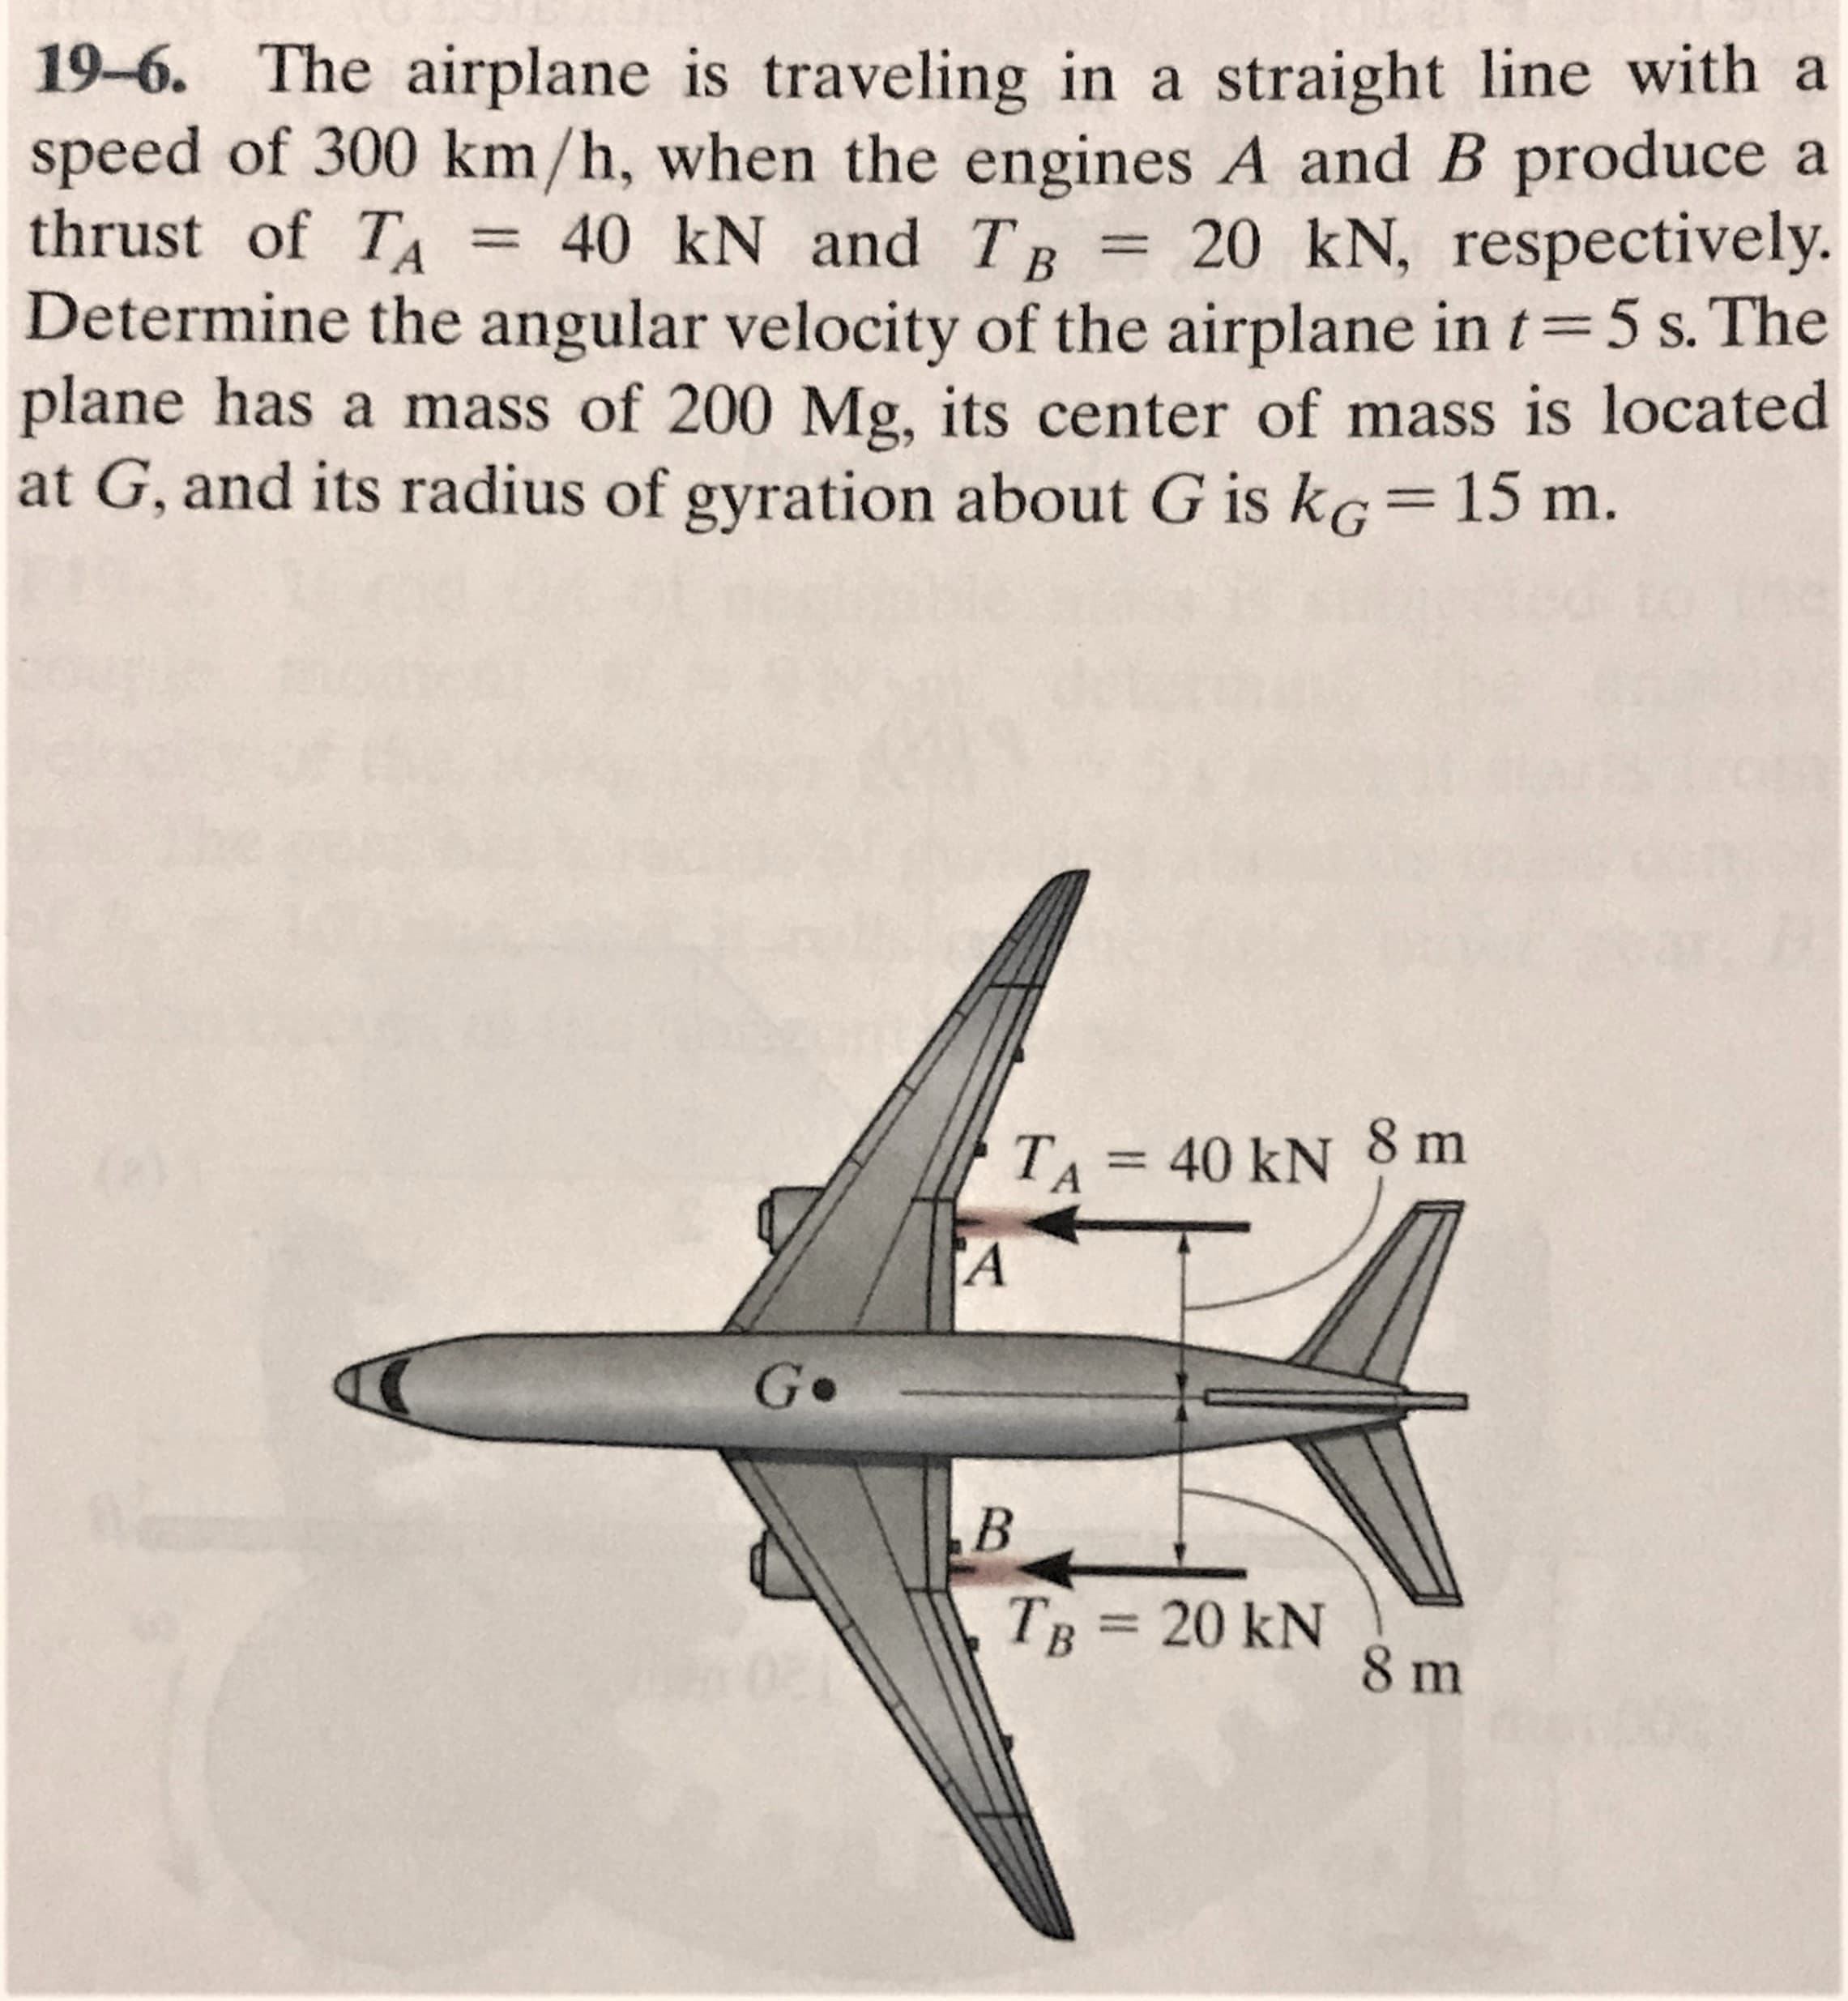 19-6. The airplane is traveling in a straight line with a
speed of 300 km/h, when the engines A and B produce a
thrust of TA = 40 kN and TR = 20 kN, respectively.
Determine the angular velocity of the airplane in t=5 s. The
plane has a mass of 200 Mg, its center of mass is located
at G, and its radius of gyration about G is kG=15 m.
%3D
TA = 40 kN 8 m
G•
B
TB = 20 kN
8 m
%3D
